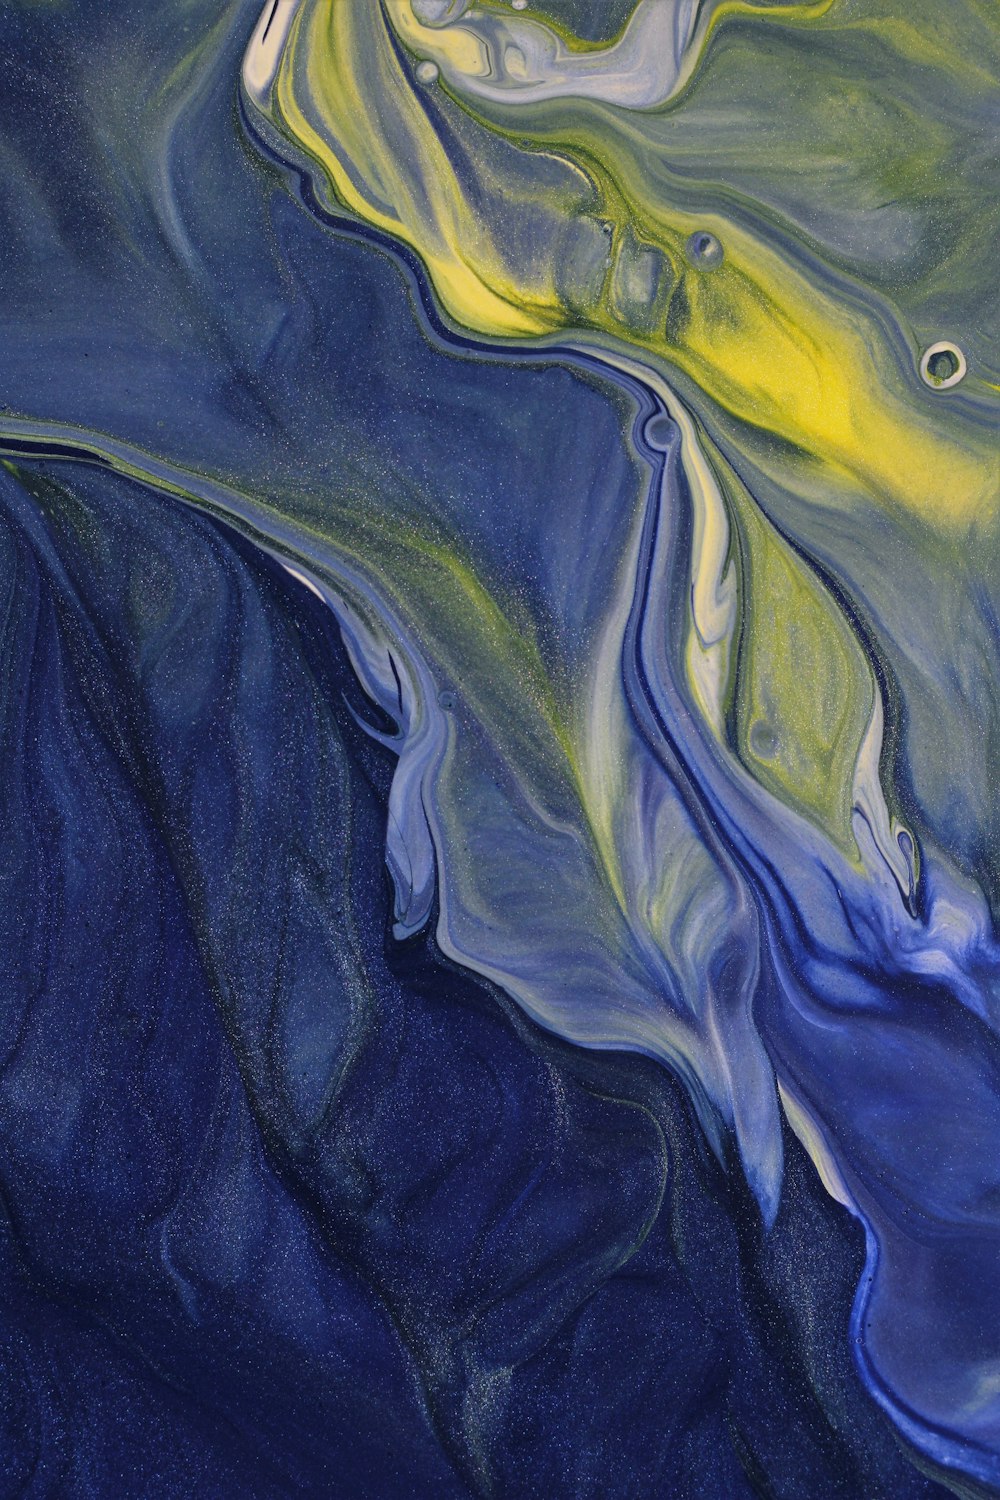 a painting of a blue and yellow liquid